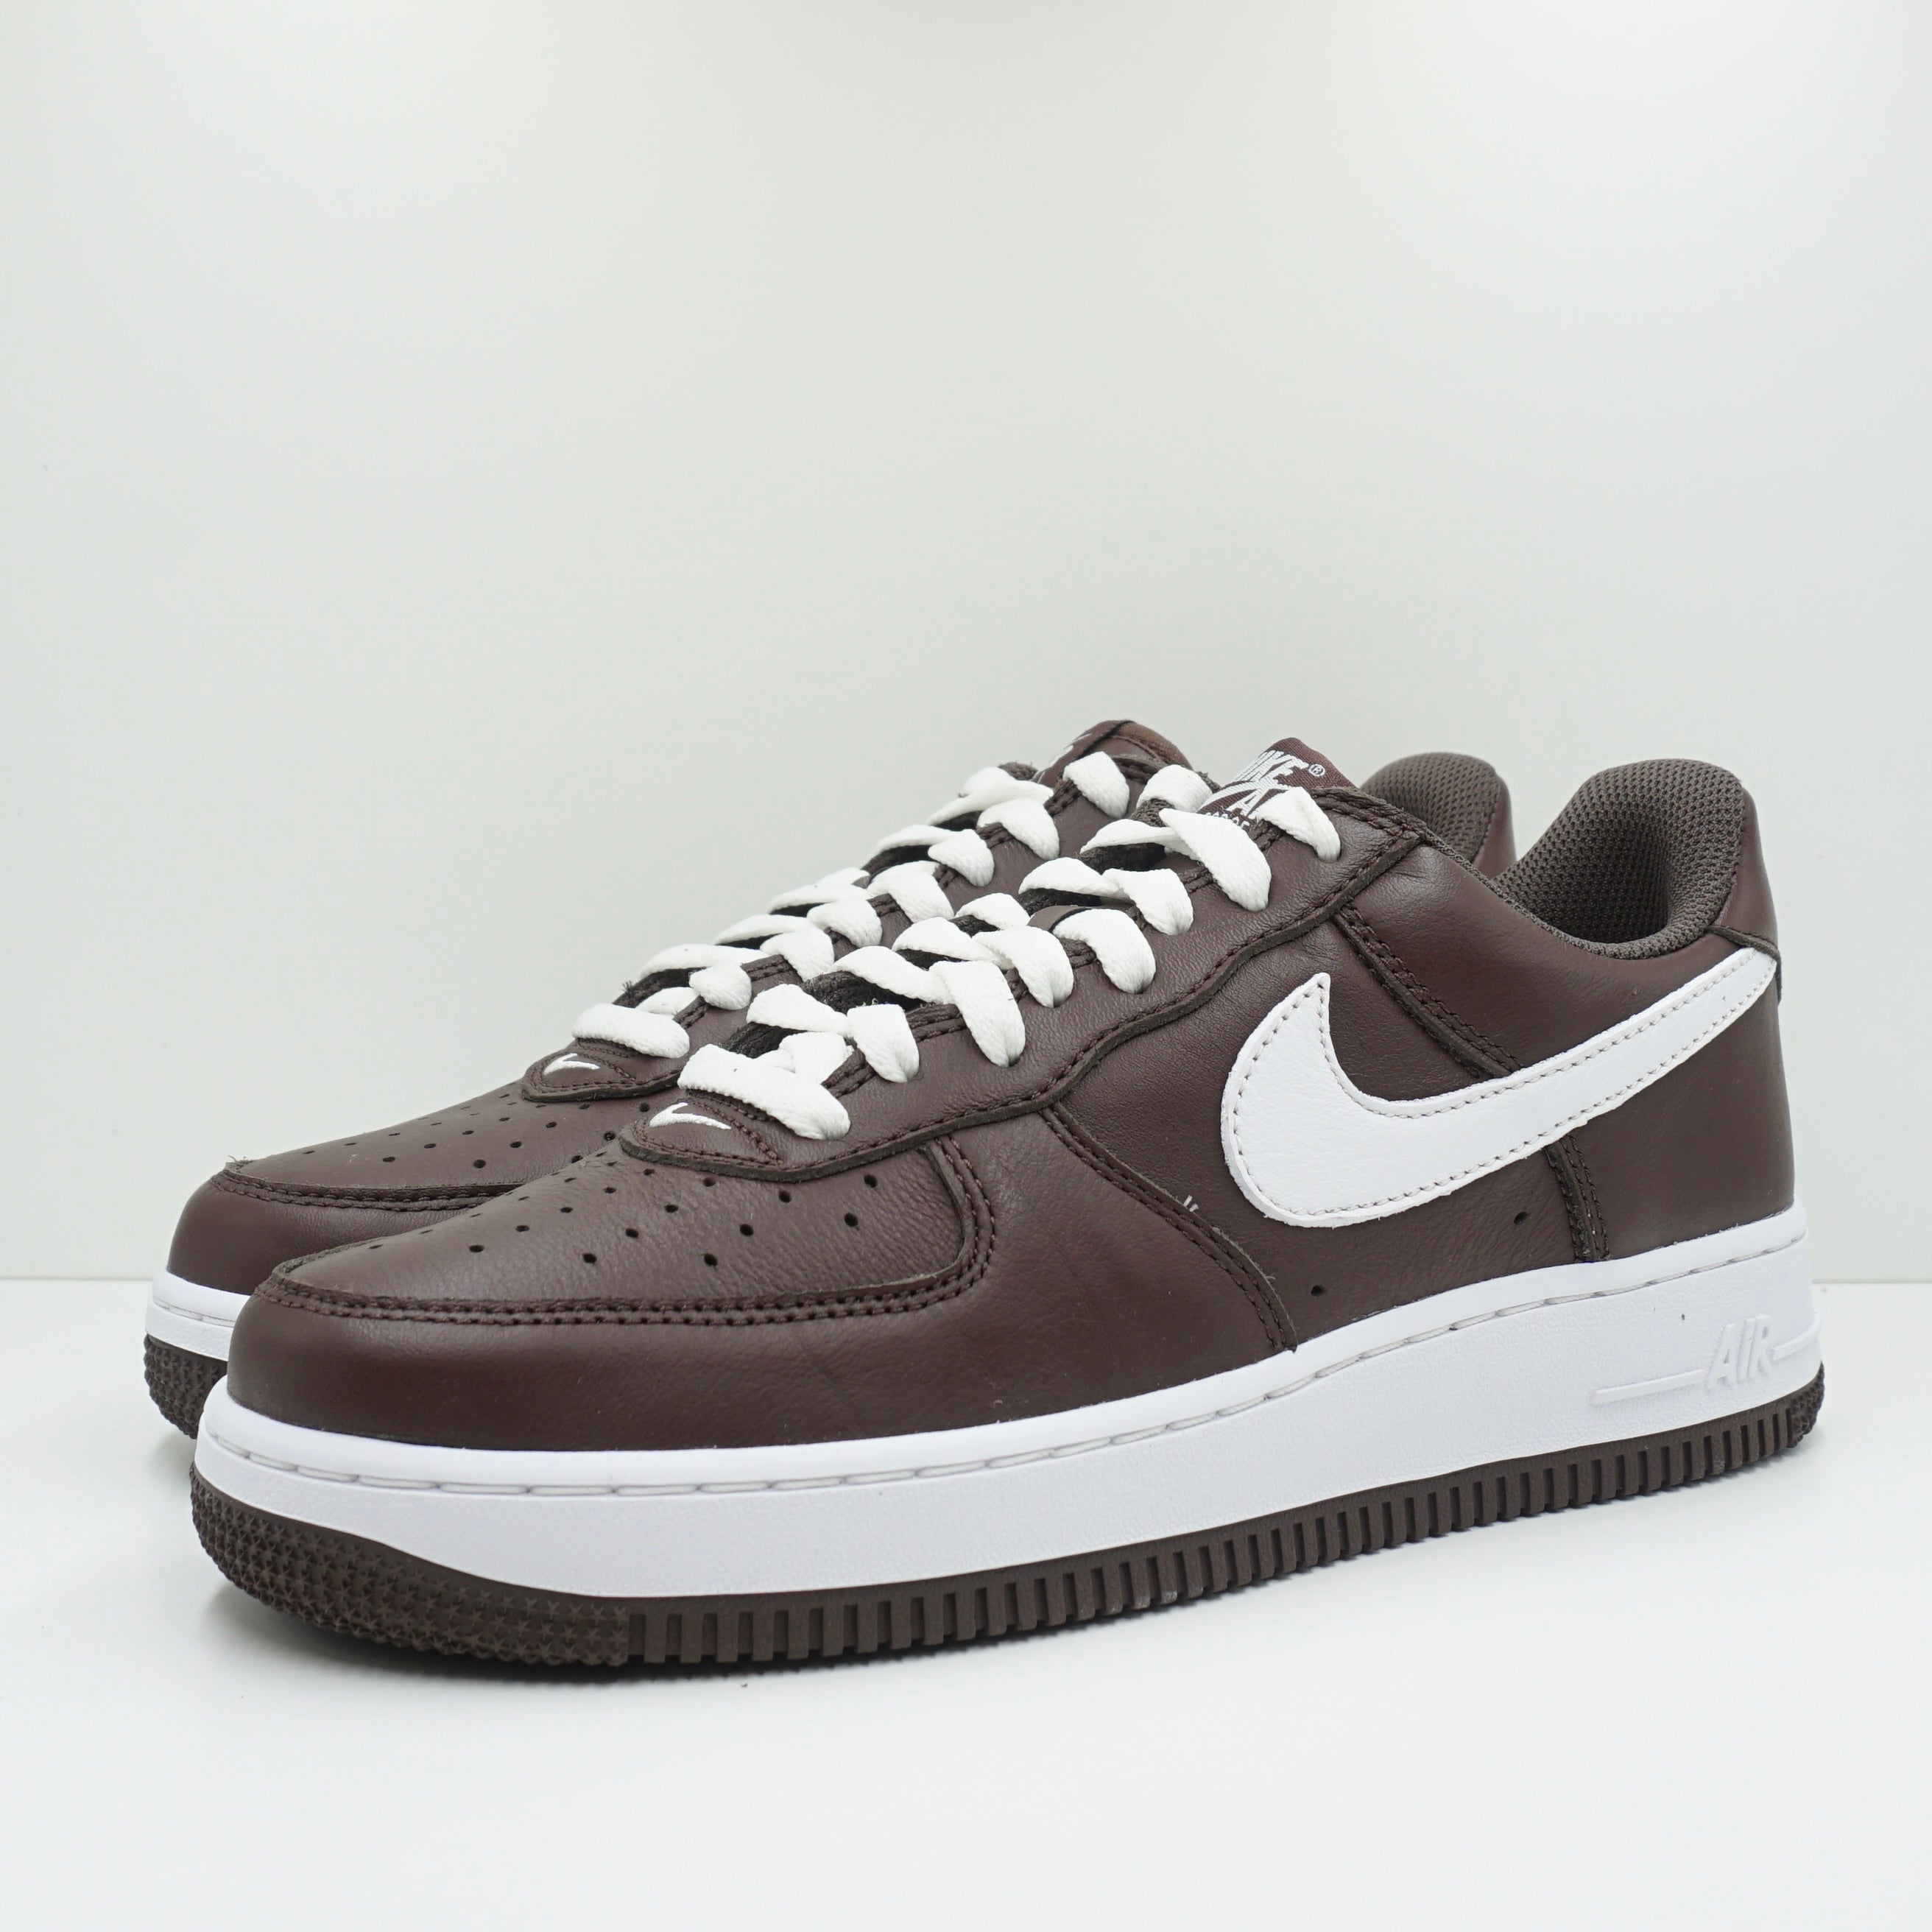 Nike Air Force 1 Low Retro Color of the Month Chocolate